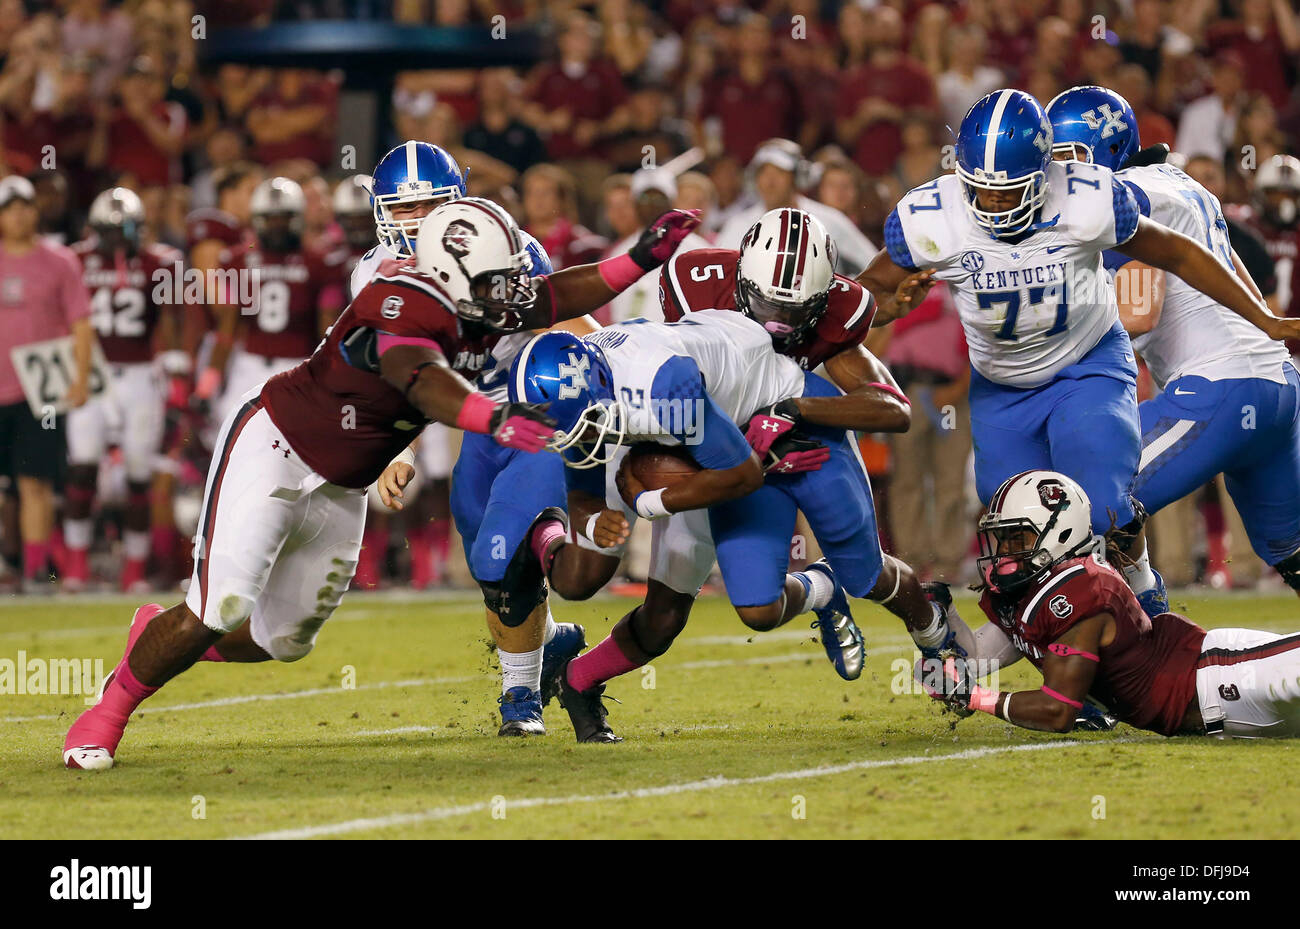 Columbia, SC, USA. 5th Oct, 2013. UK's Jalen Whitlow was sacked by South Carolina's 97- J.T. Surratt and 5- Darius English as the University of Kentucky played South Carolina in Williams-Brice Stadium in Columbia, S.C. Saturday, October 5, 2013. This is first quarter football action. Photo by Charles Bertram | Staff Credit:  Lexington Herald-Leader/ZUMAPRESS.com/Alamy Live News Stock Photo